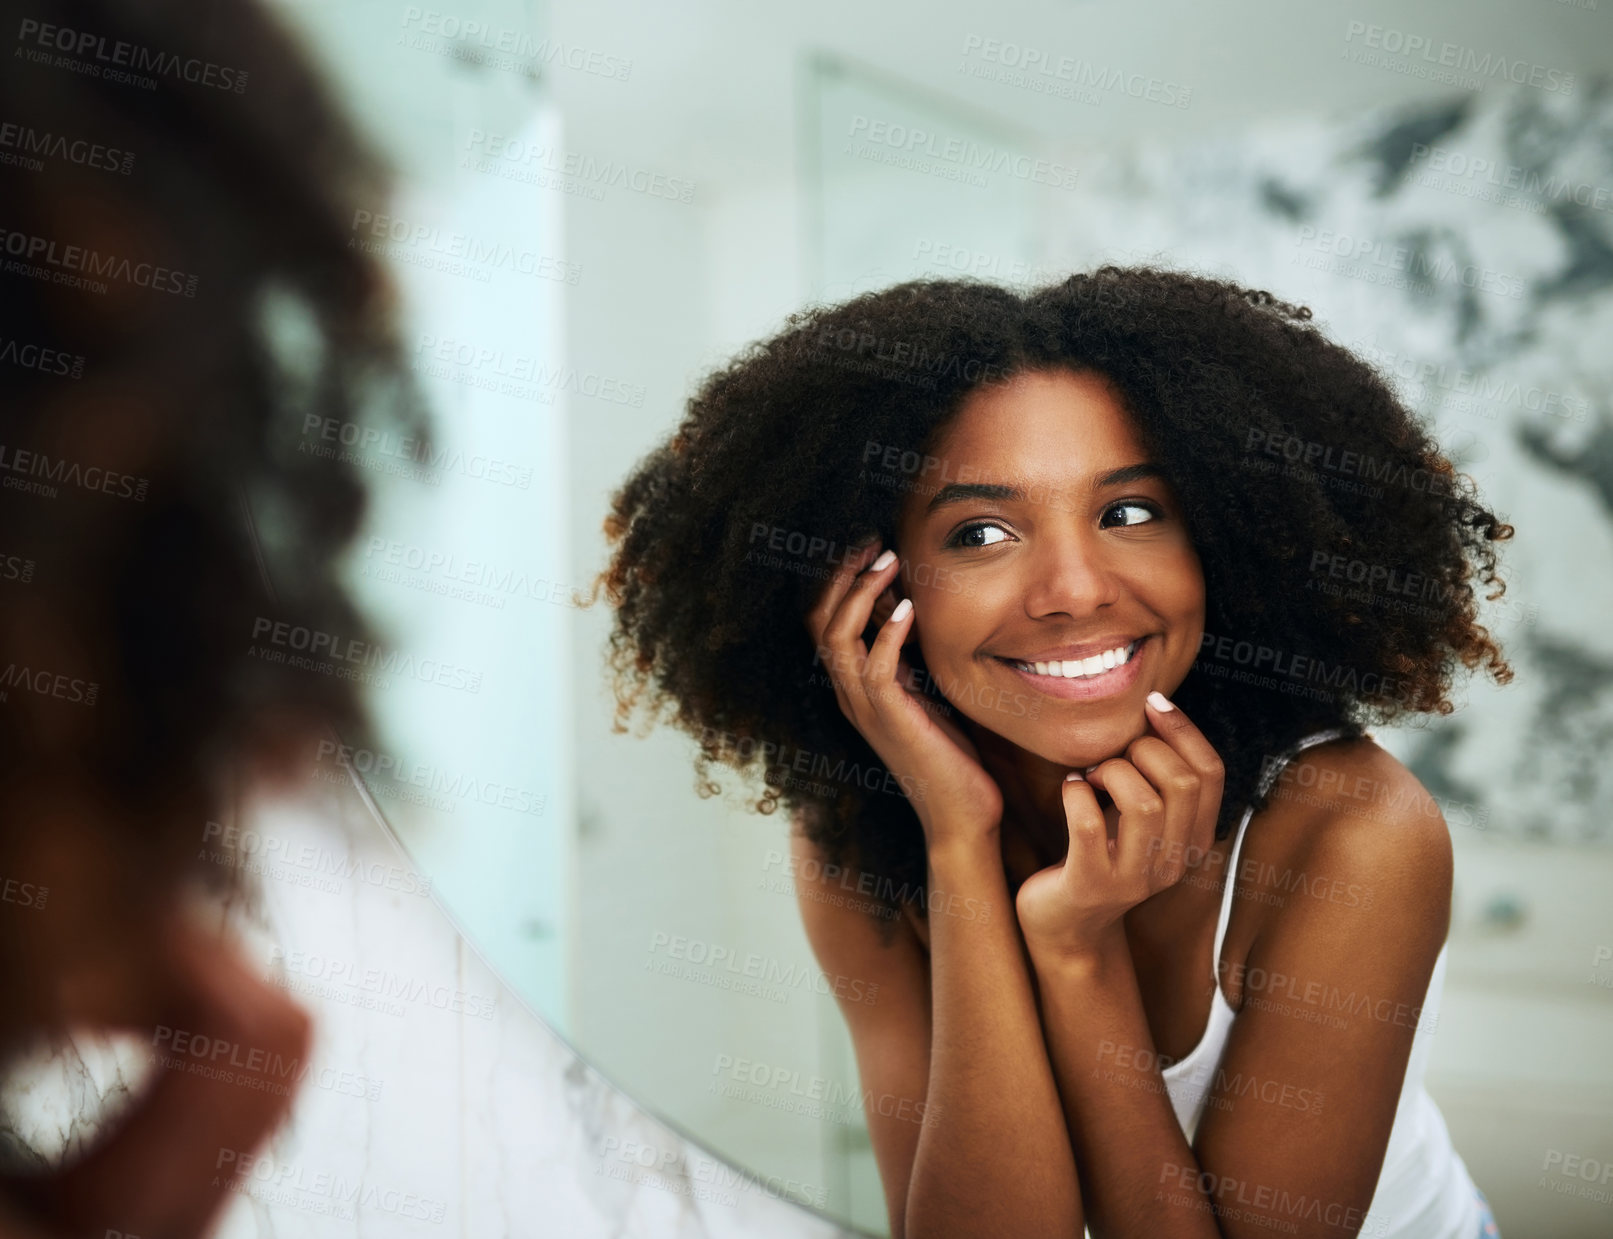 Buy stock photo Shot of an attractive young woman looking at her face in the mirror at home